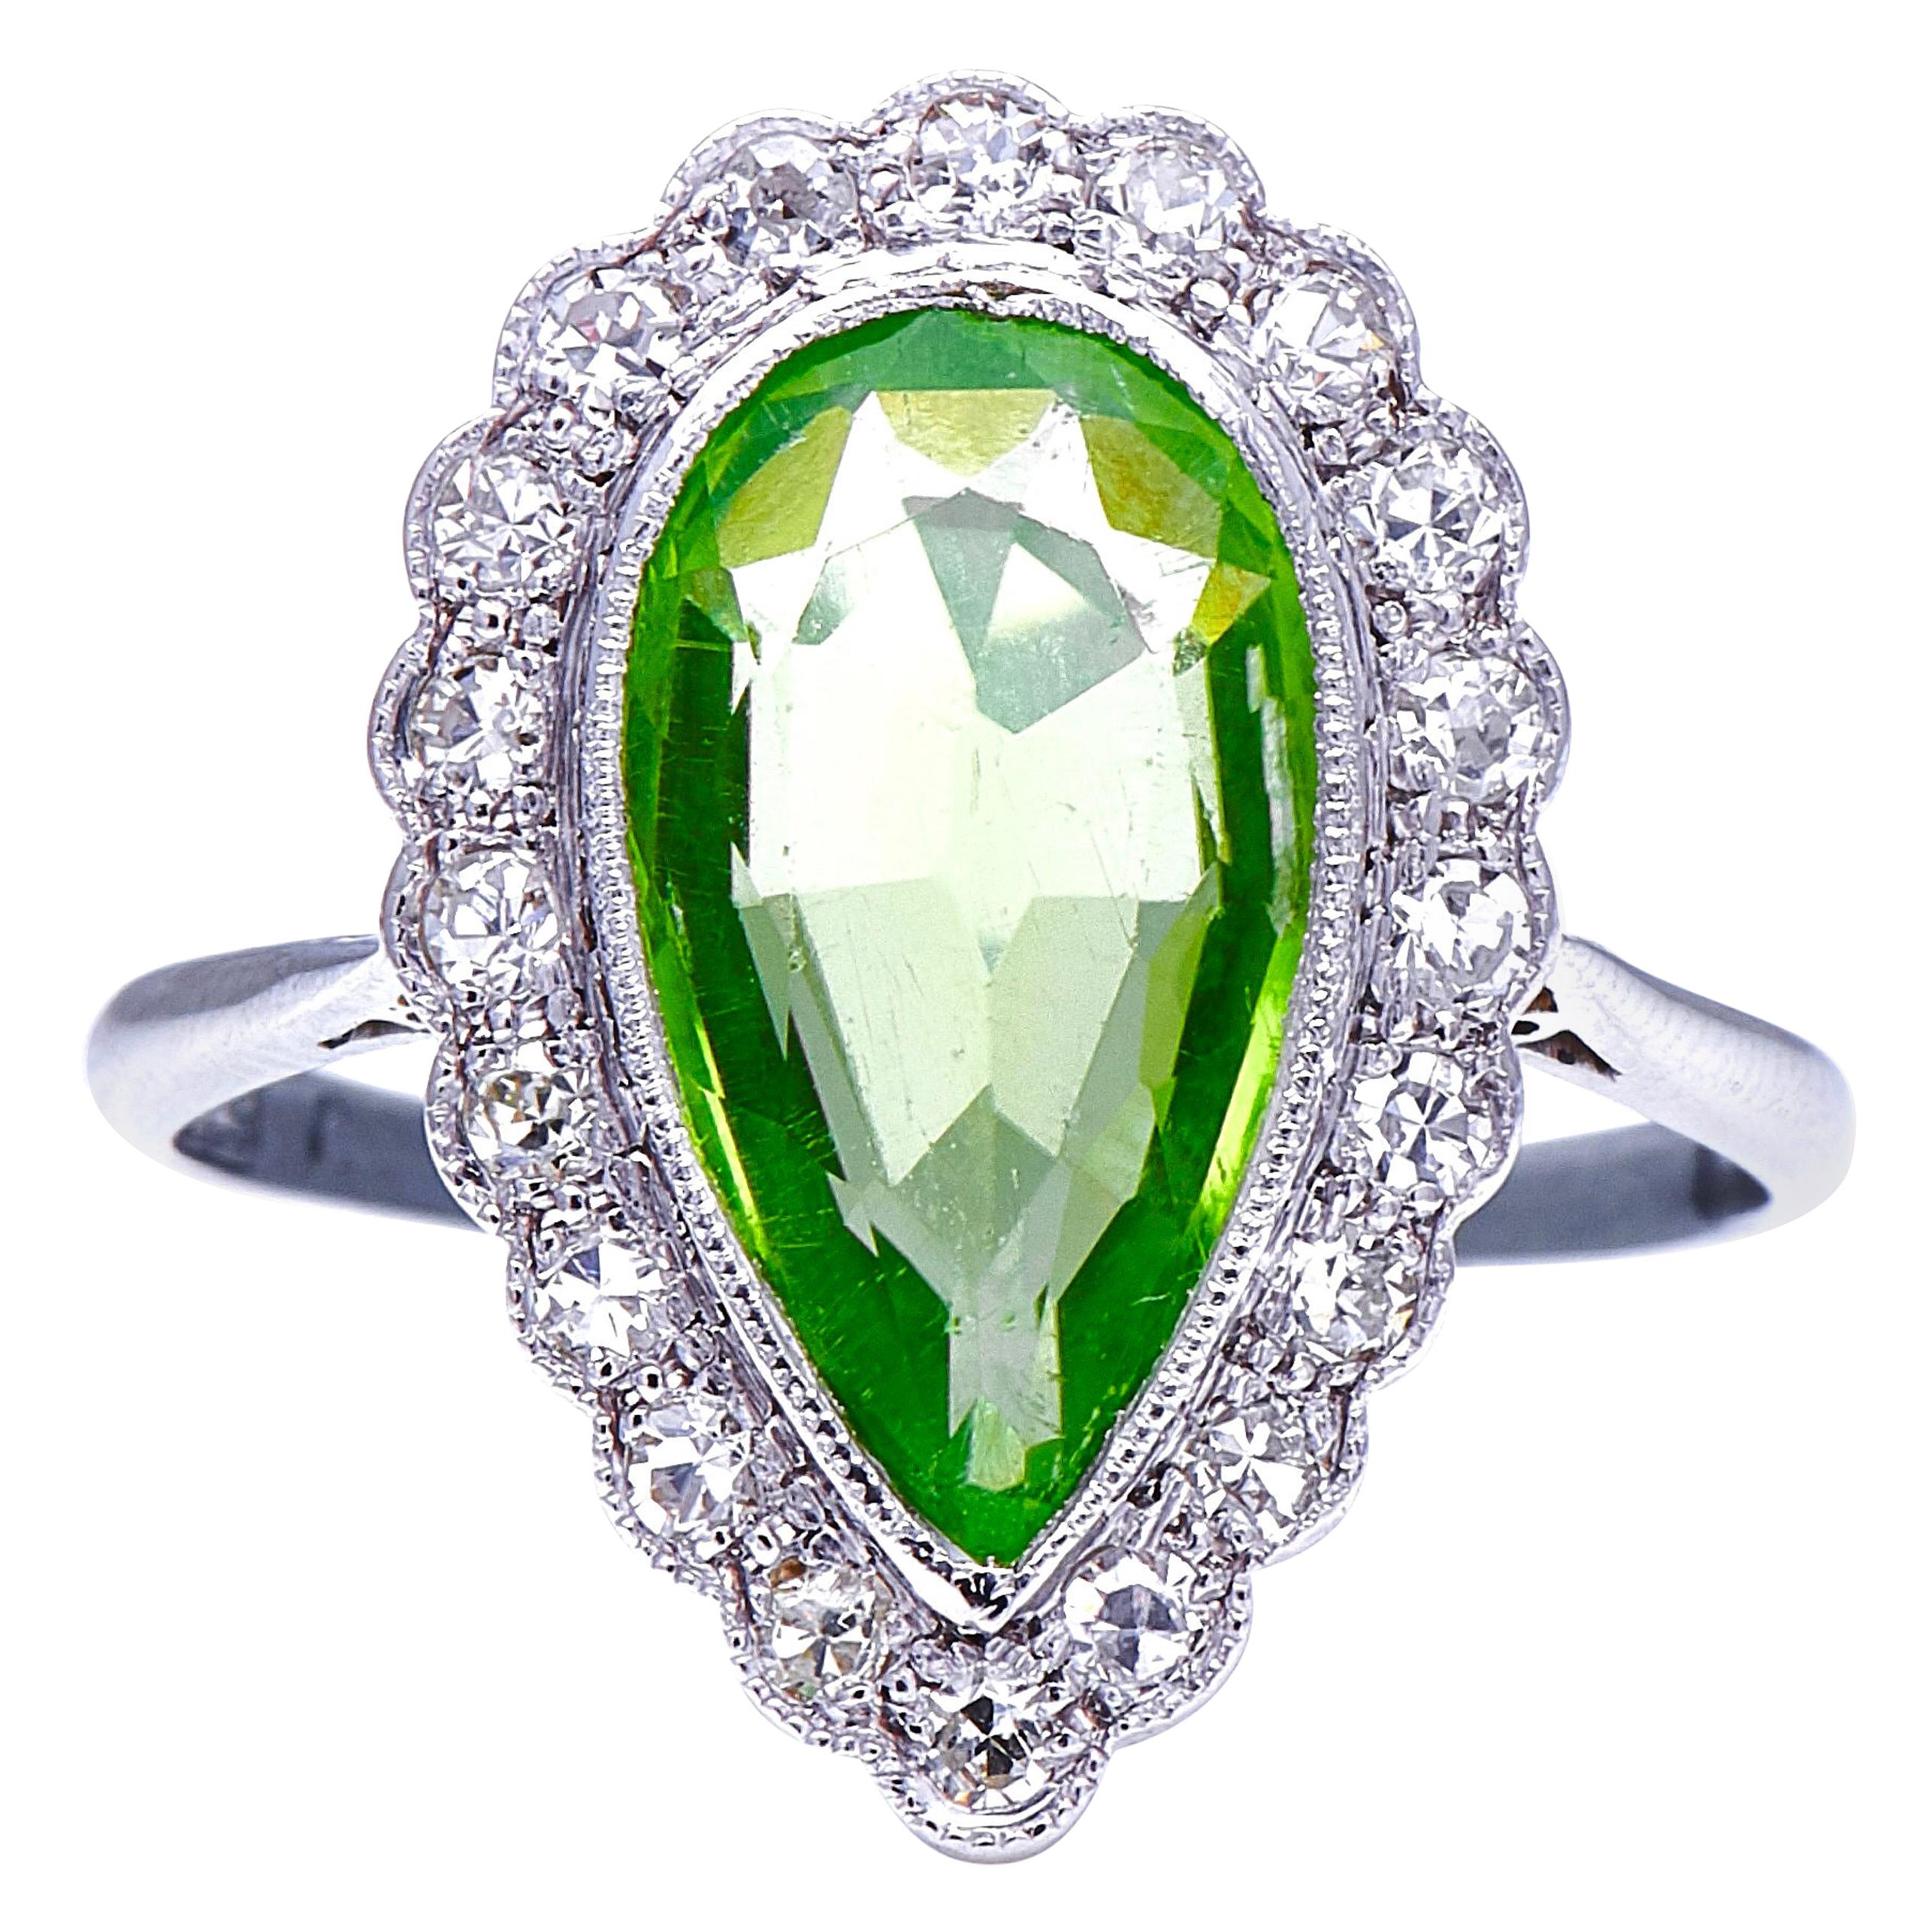  Antique, Edwardian, 18 Carat White Gold, Peridot and Diamond Cluster Ring For Sale